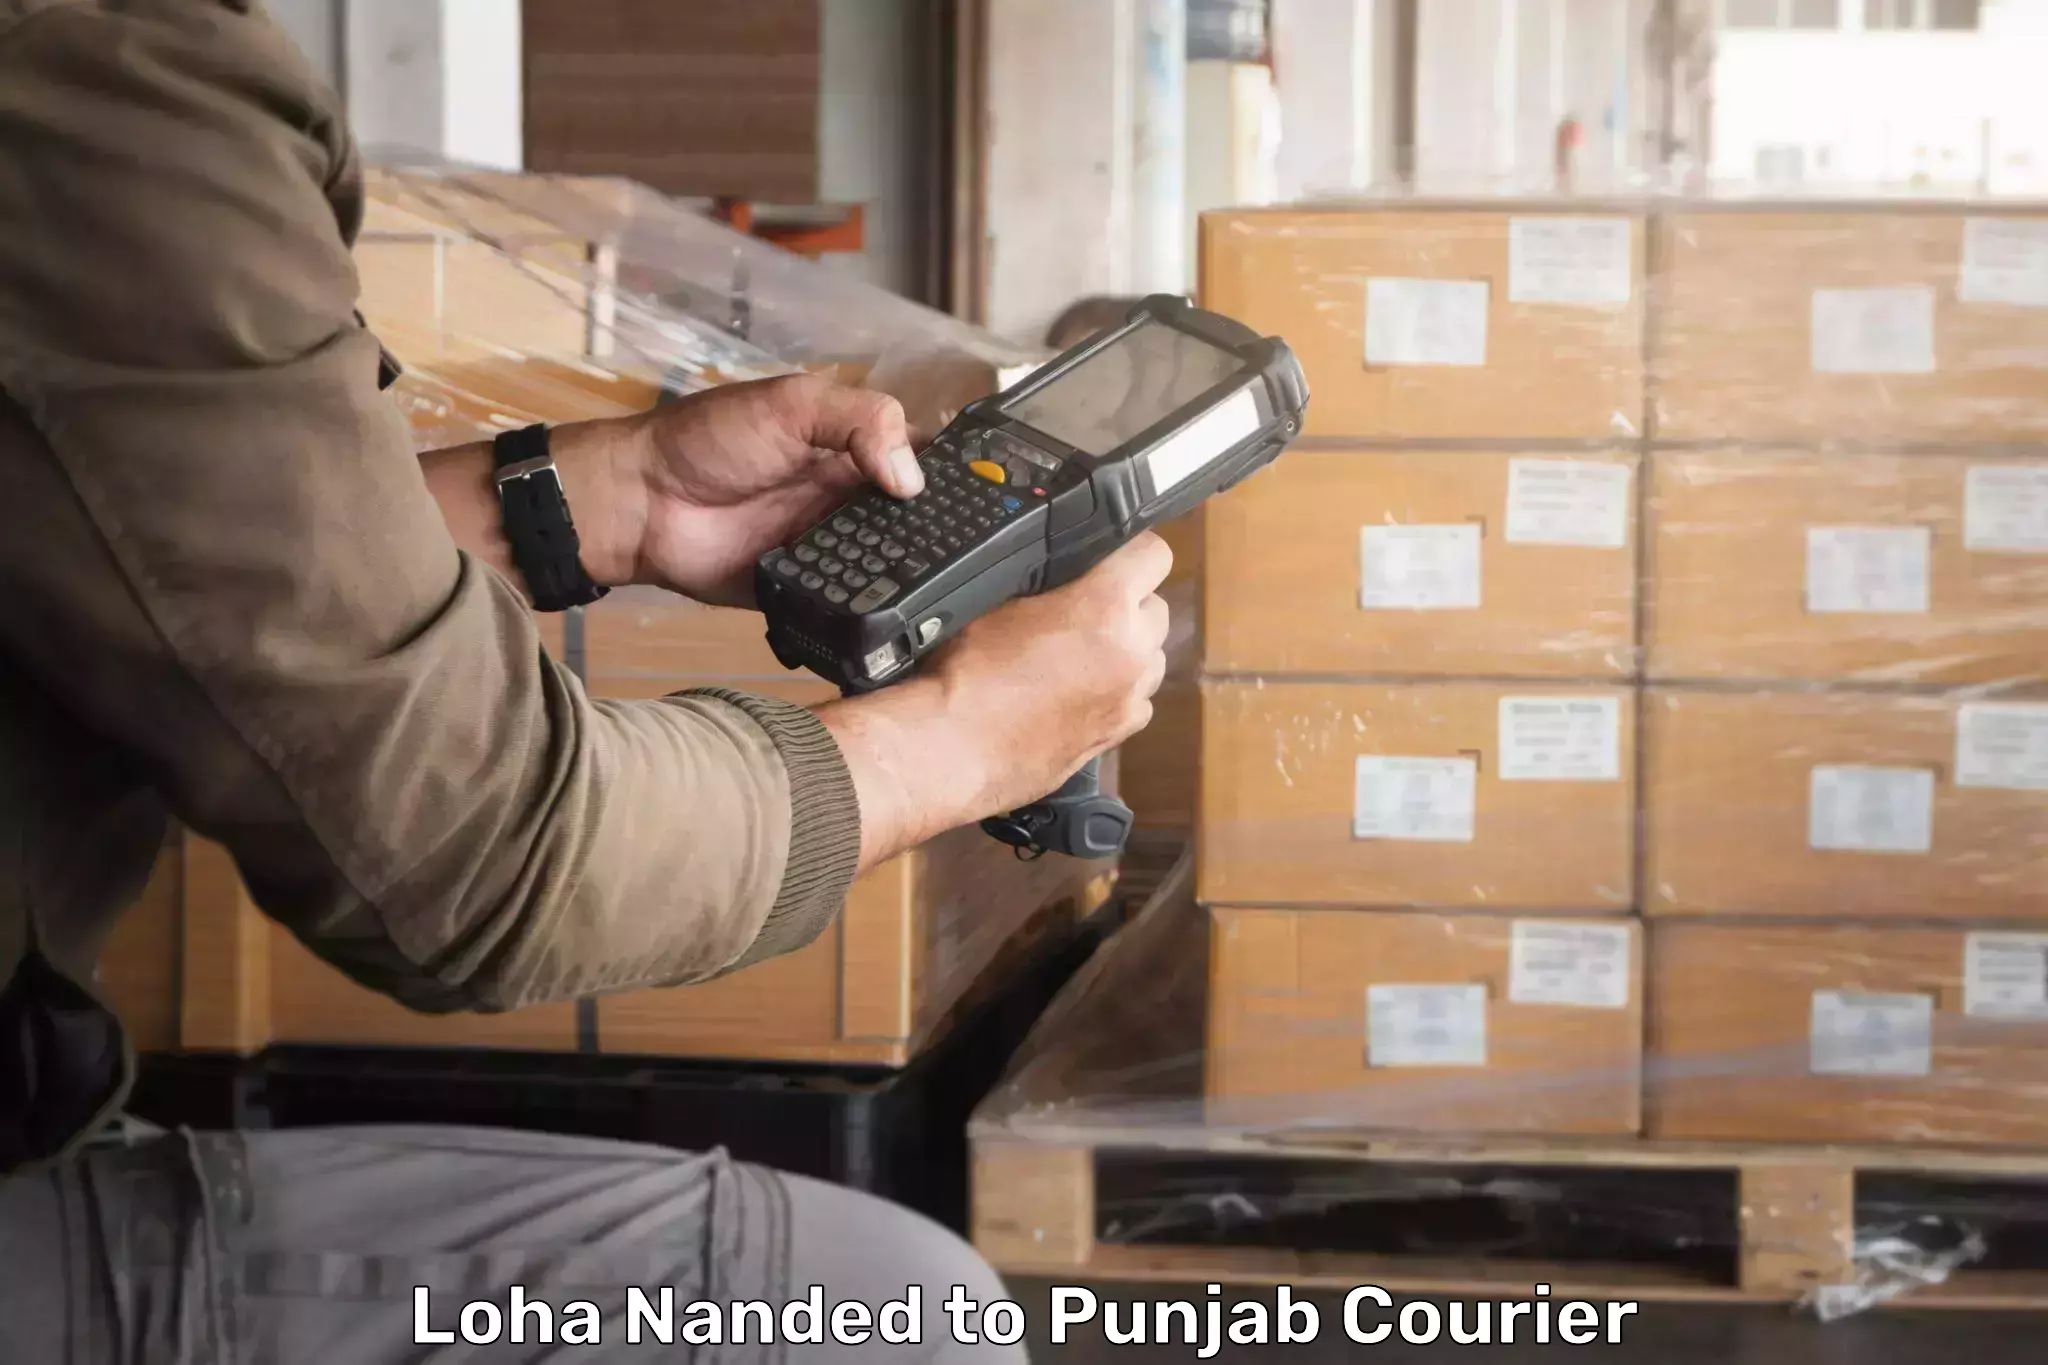 High-speed parcel service Loha Nanded to Dhuri